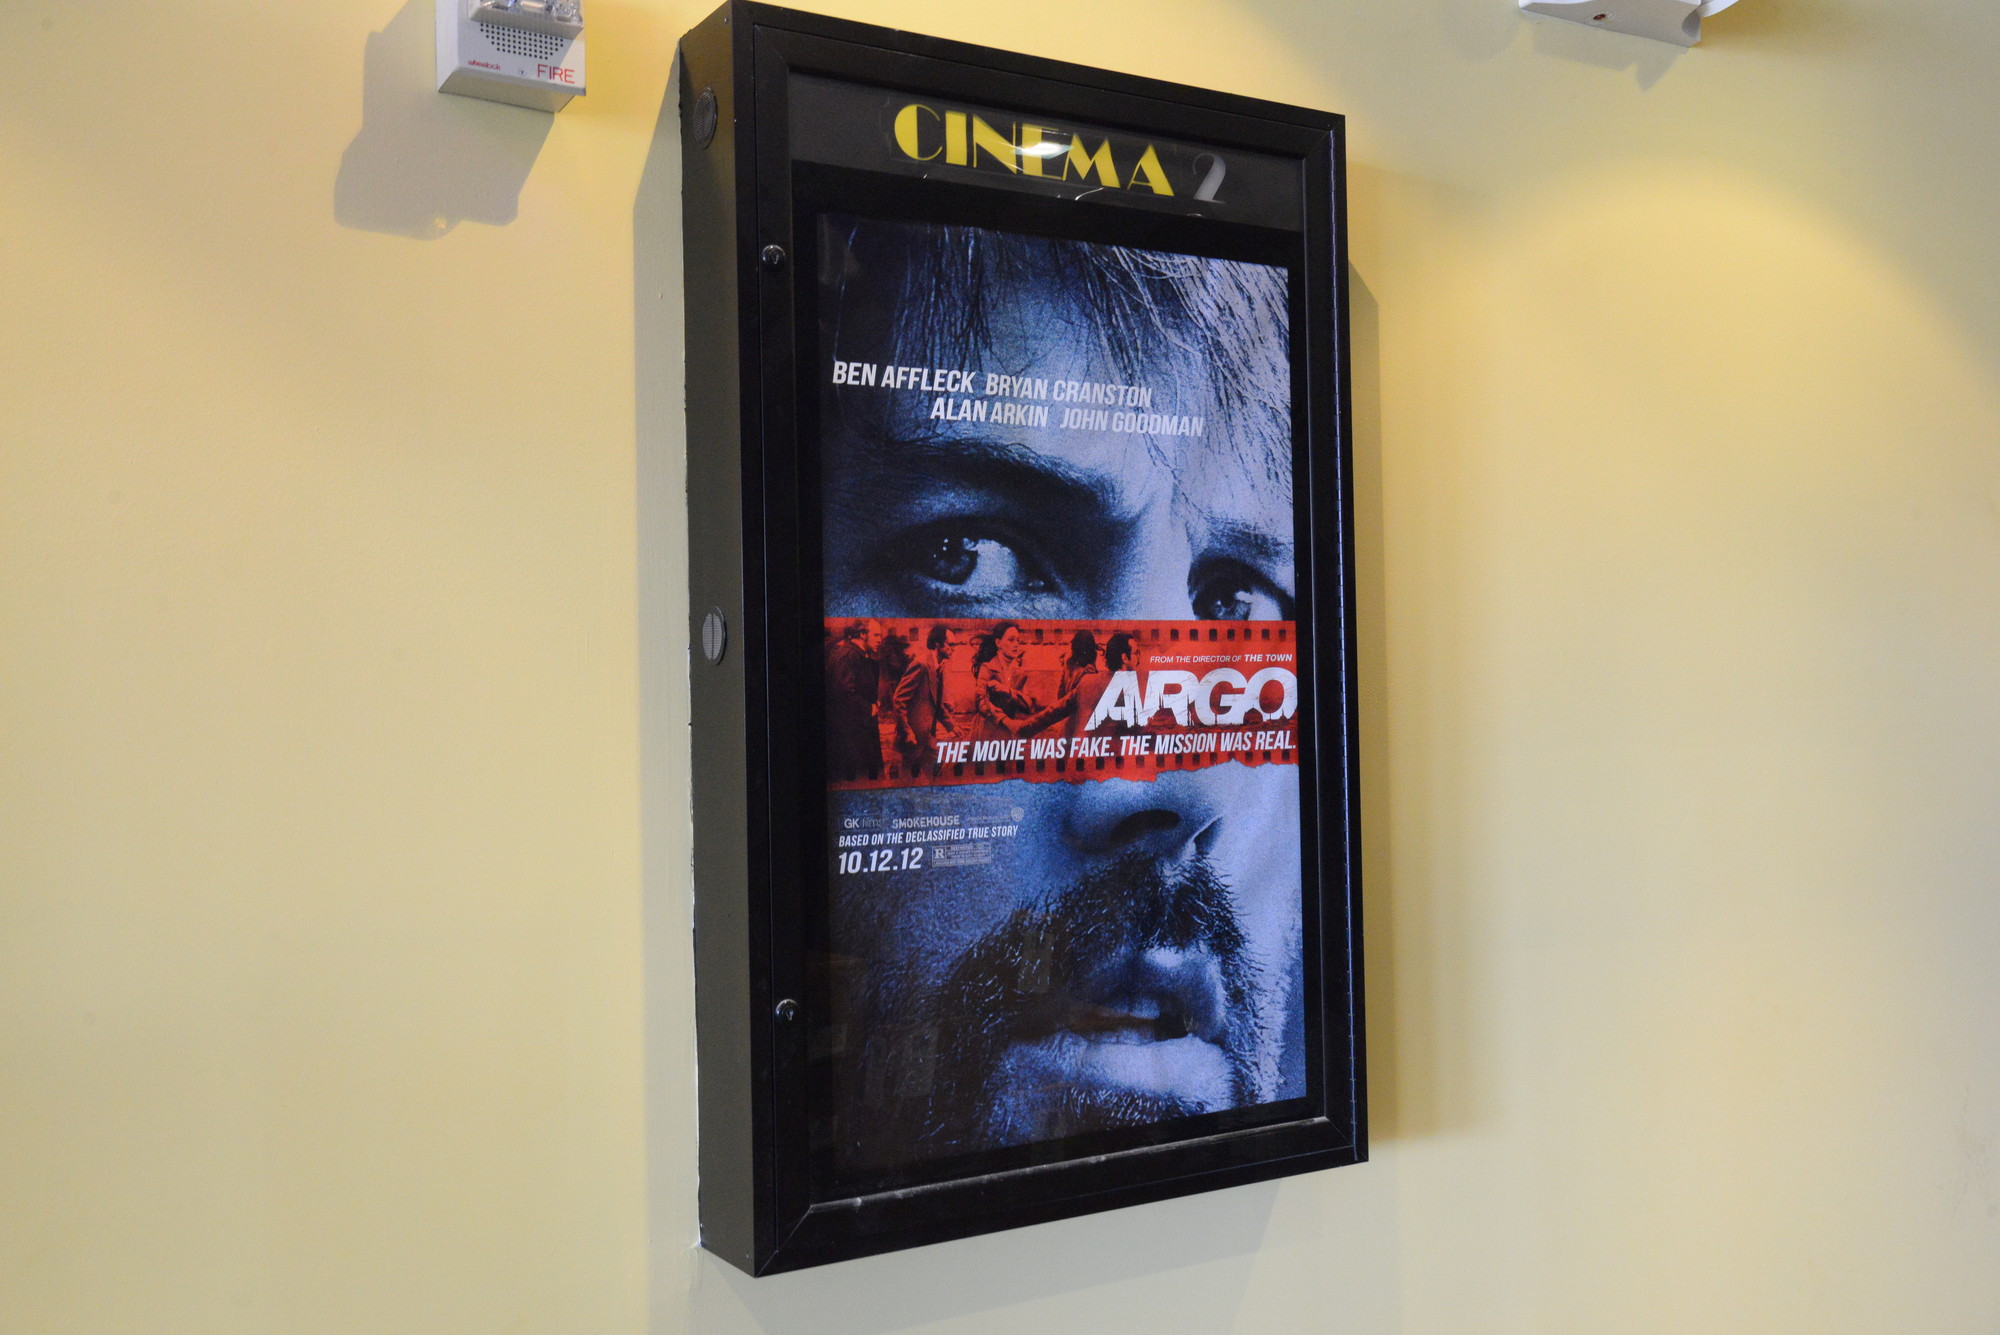 “Argo” was among the last films screened at the theater before Hurricane Sandy. This week, the theater will feature “Ted 2” and “Inside Out,” among other films.